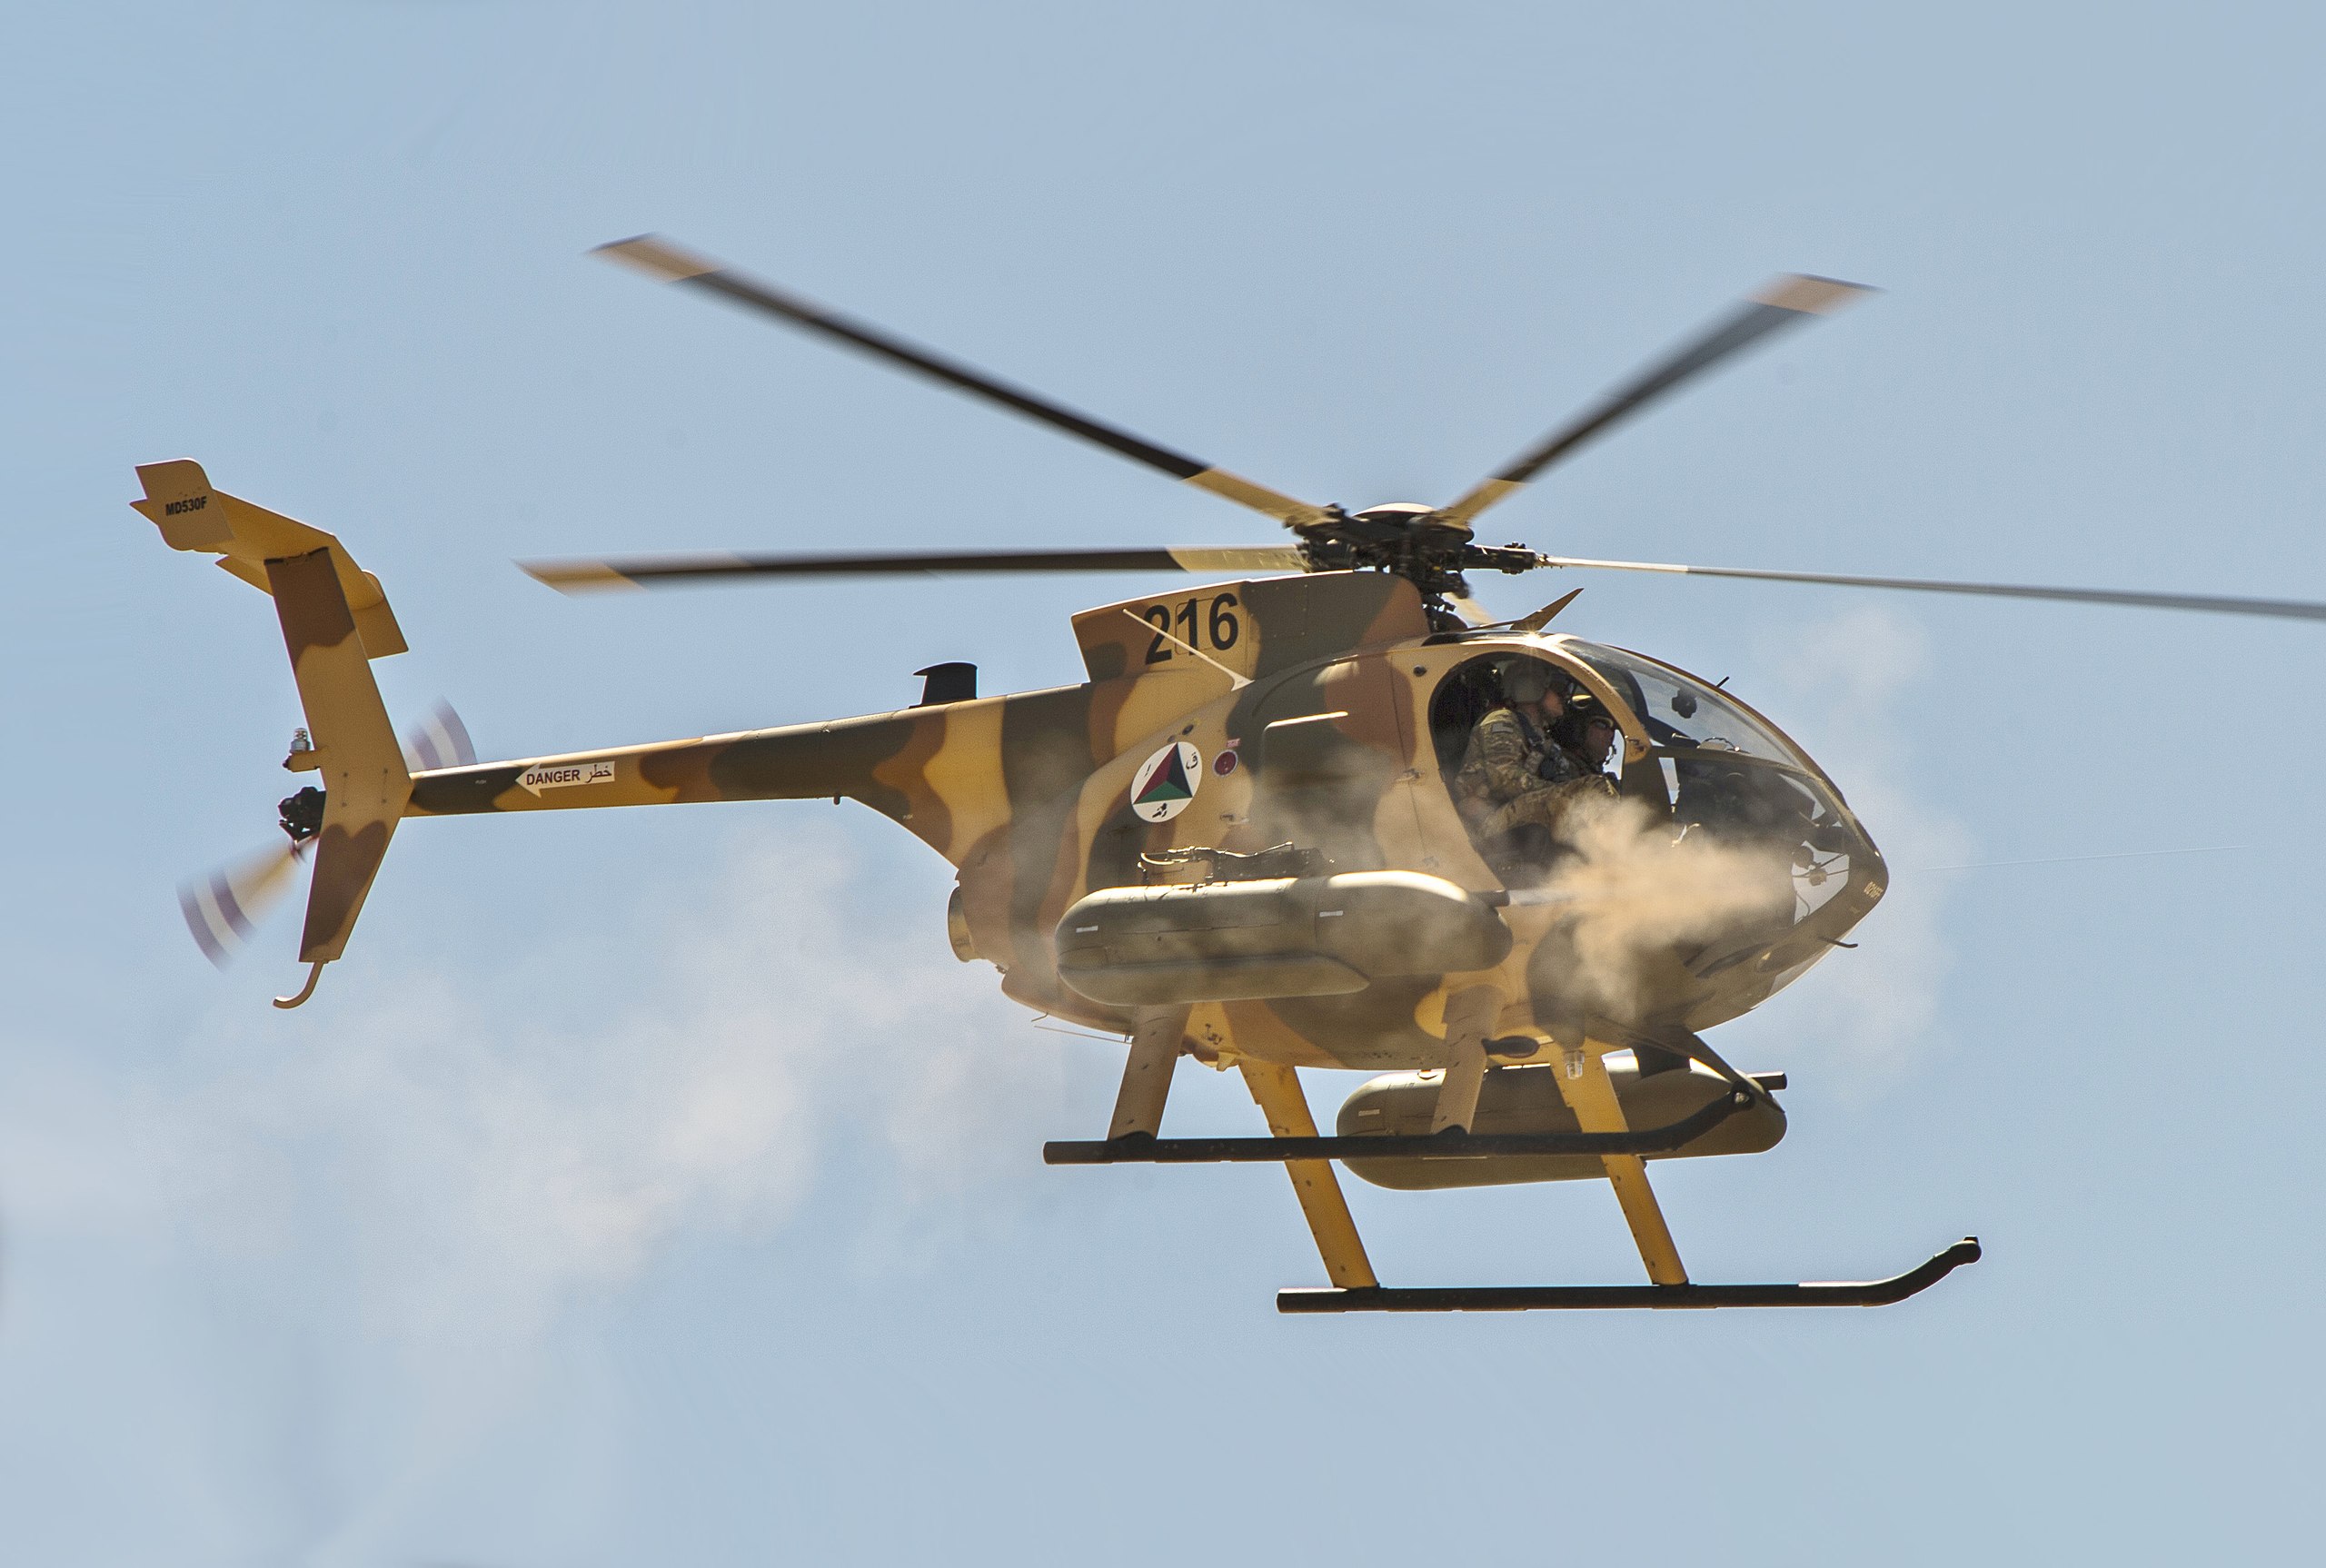 Taliban Claims It Shot Down Attack Helicopter, Afghan MoD Denies (Video, Photos)